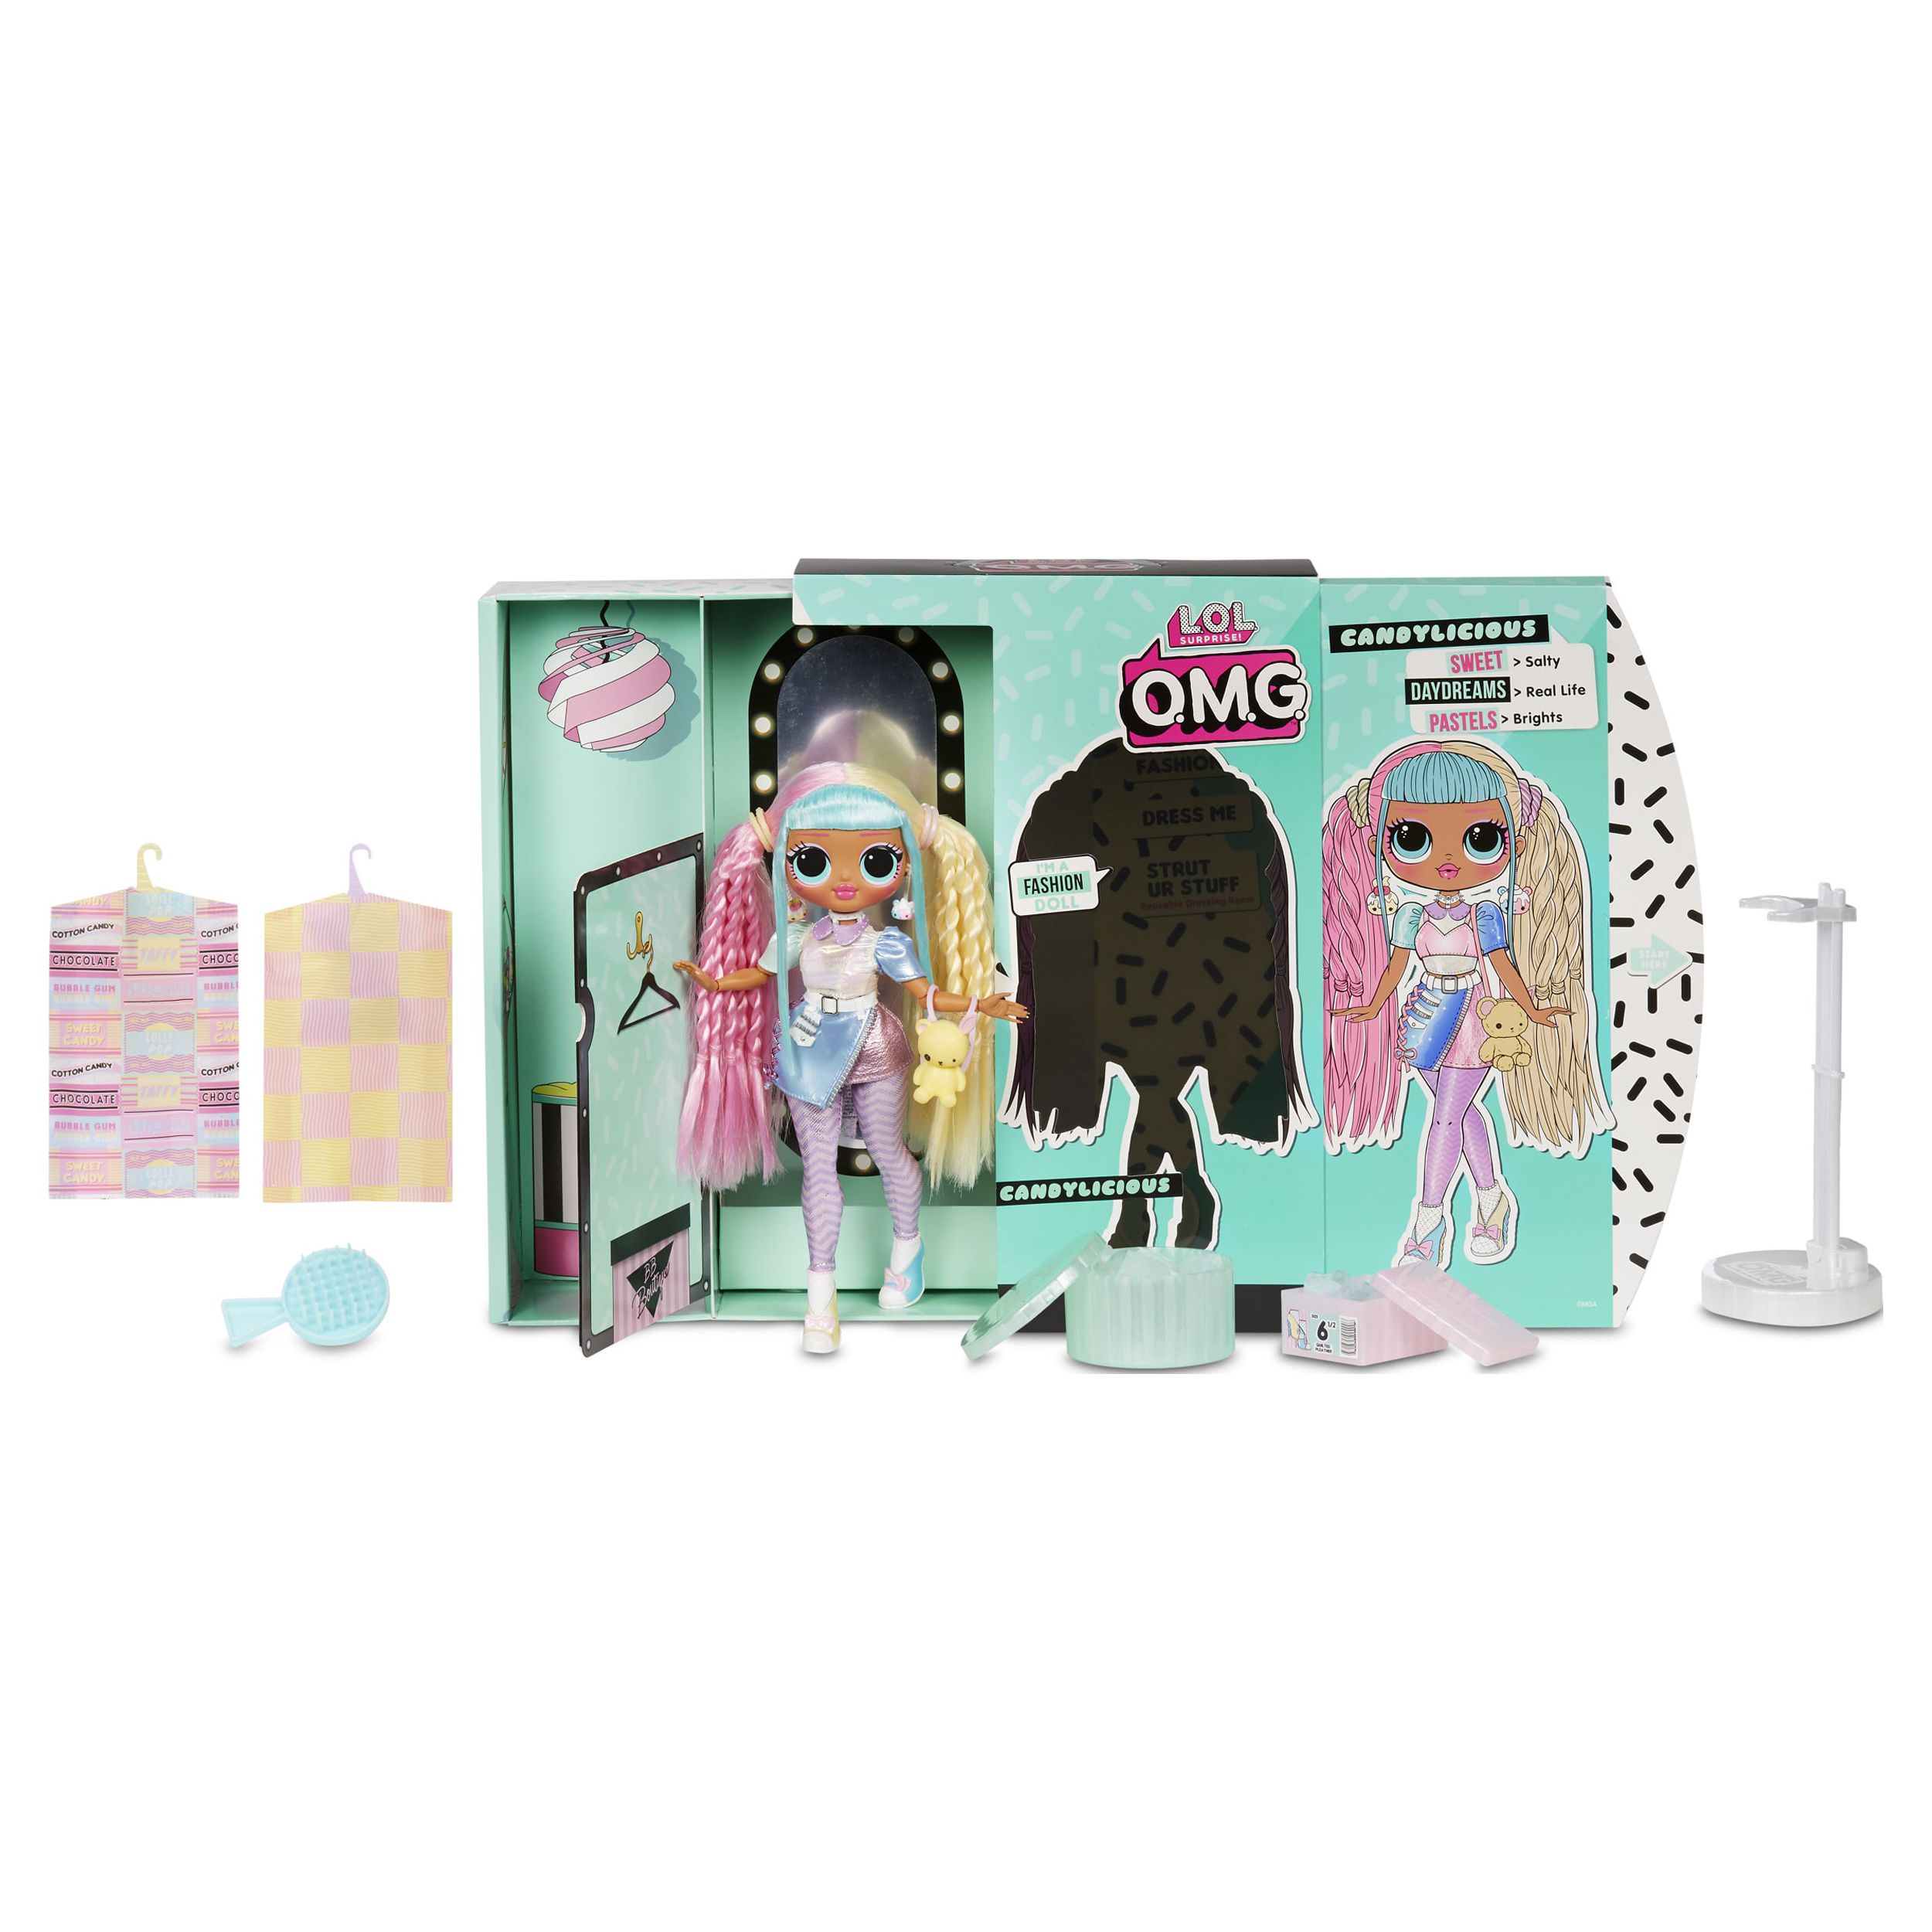 LOL Surprise OMG Candylicious Fashion Doll With 20 Surprises, Great Gift for Kids Ages 4 5 6+ - image 4 of 6